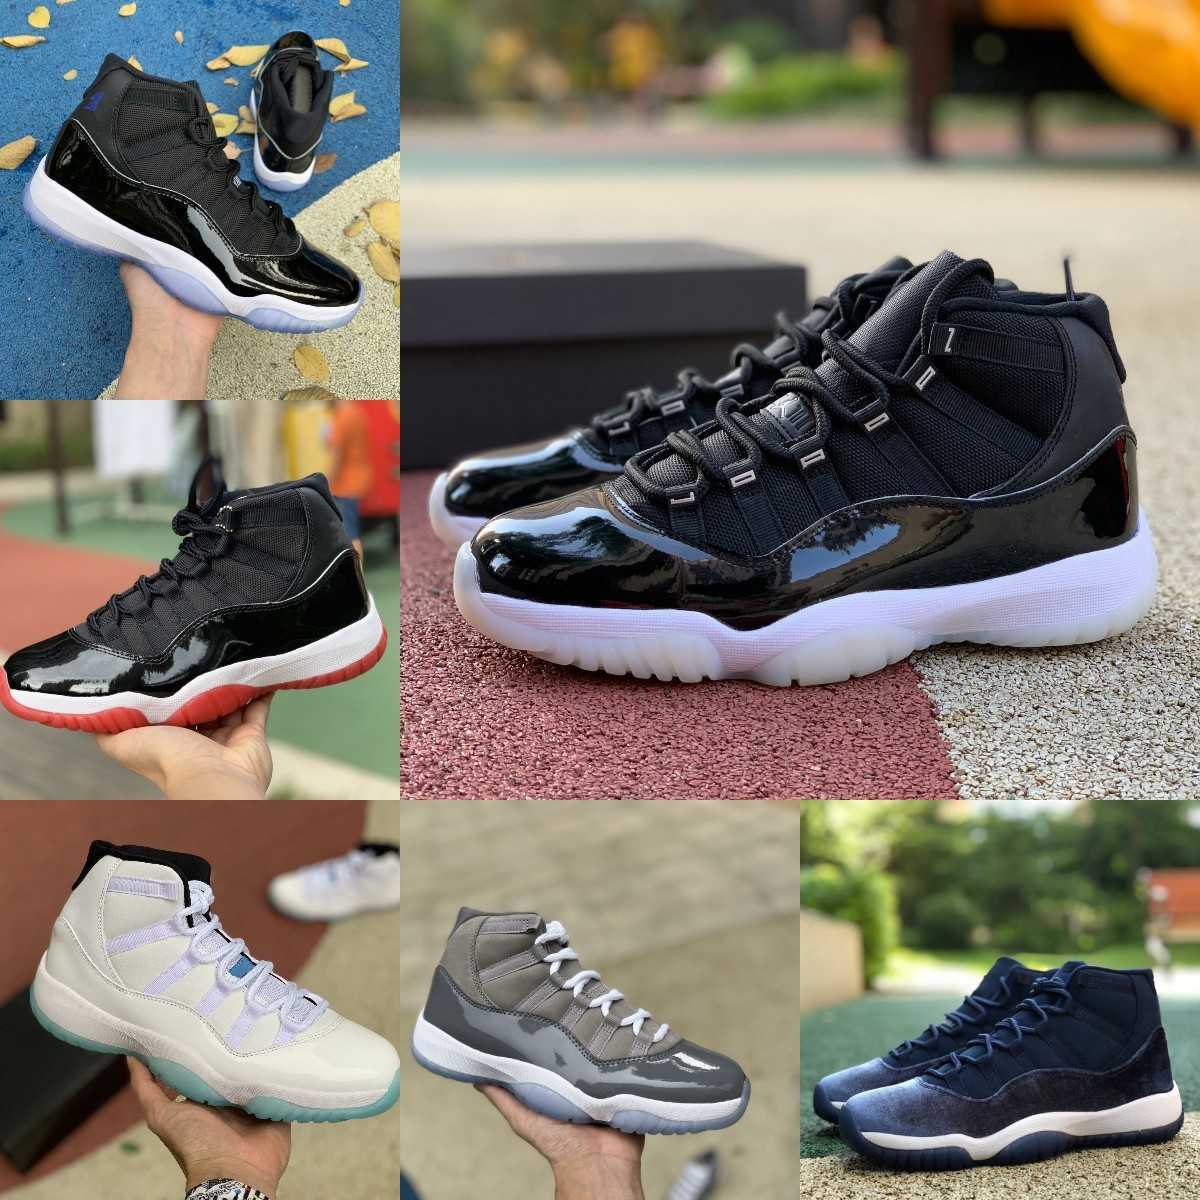 

Jubilee Jumpman 11 11s High Basketball Shoes COOL GREY Legend Blue Midnight Navy Playoffs Bred Space Jam Gamma Blue Easter Concord 45 Low, M304